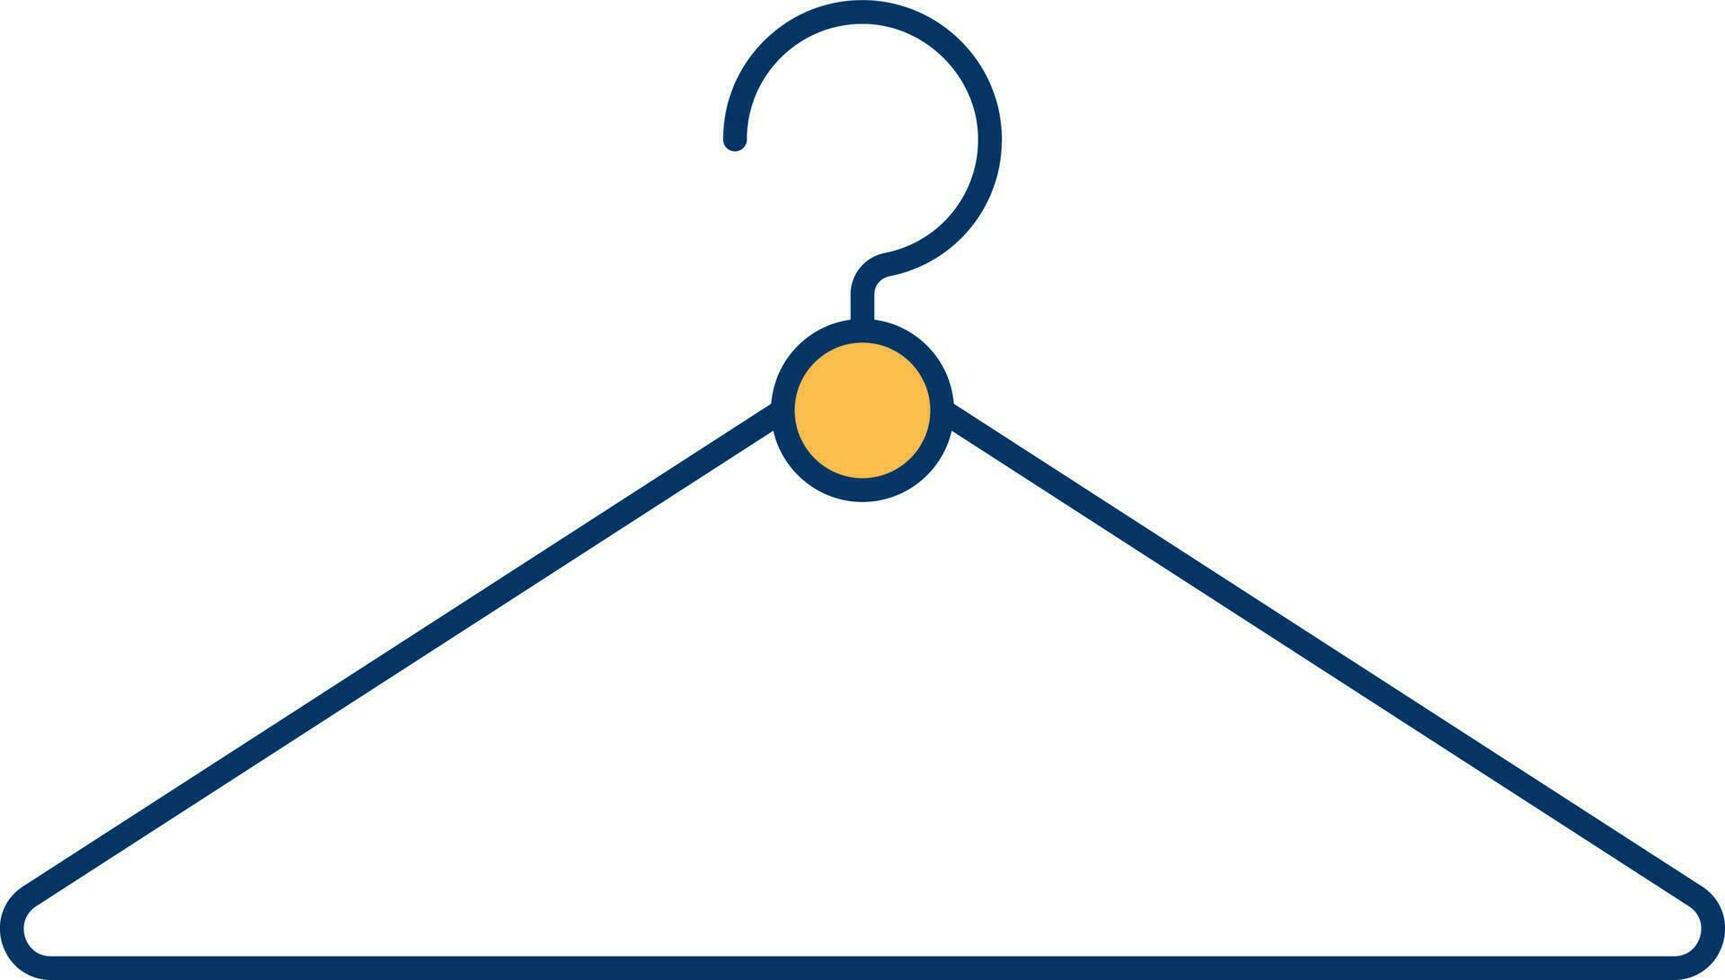 Hanger Icon In Blue And Yellow Color. vector